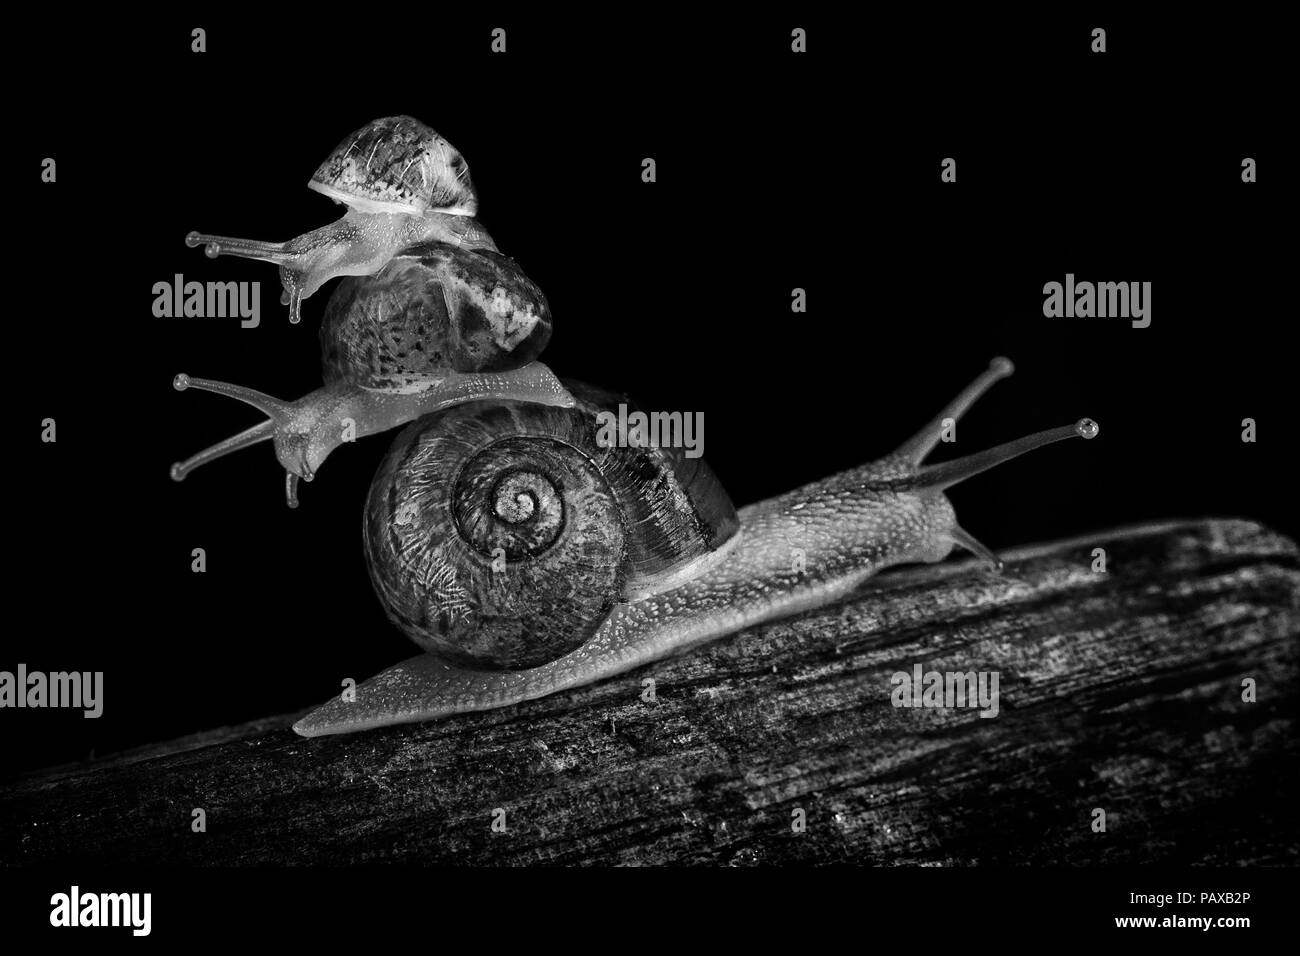 Two small Snails piled up on one big snail travelling in different directions Stock Photo